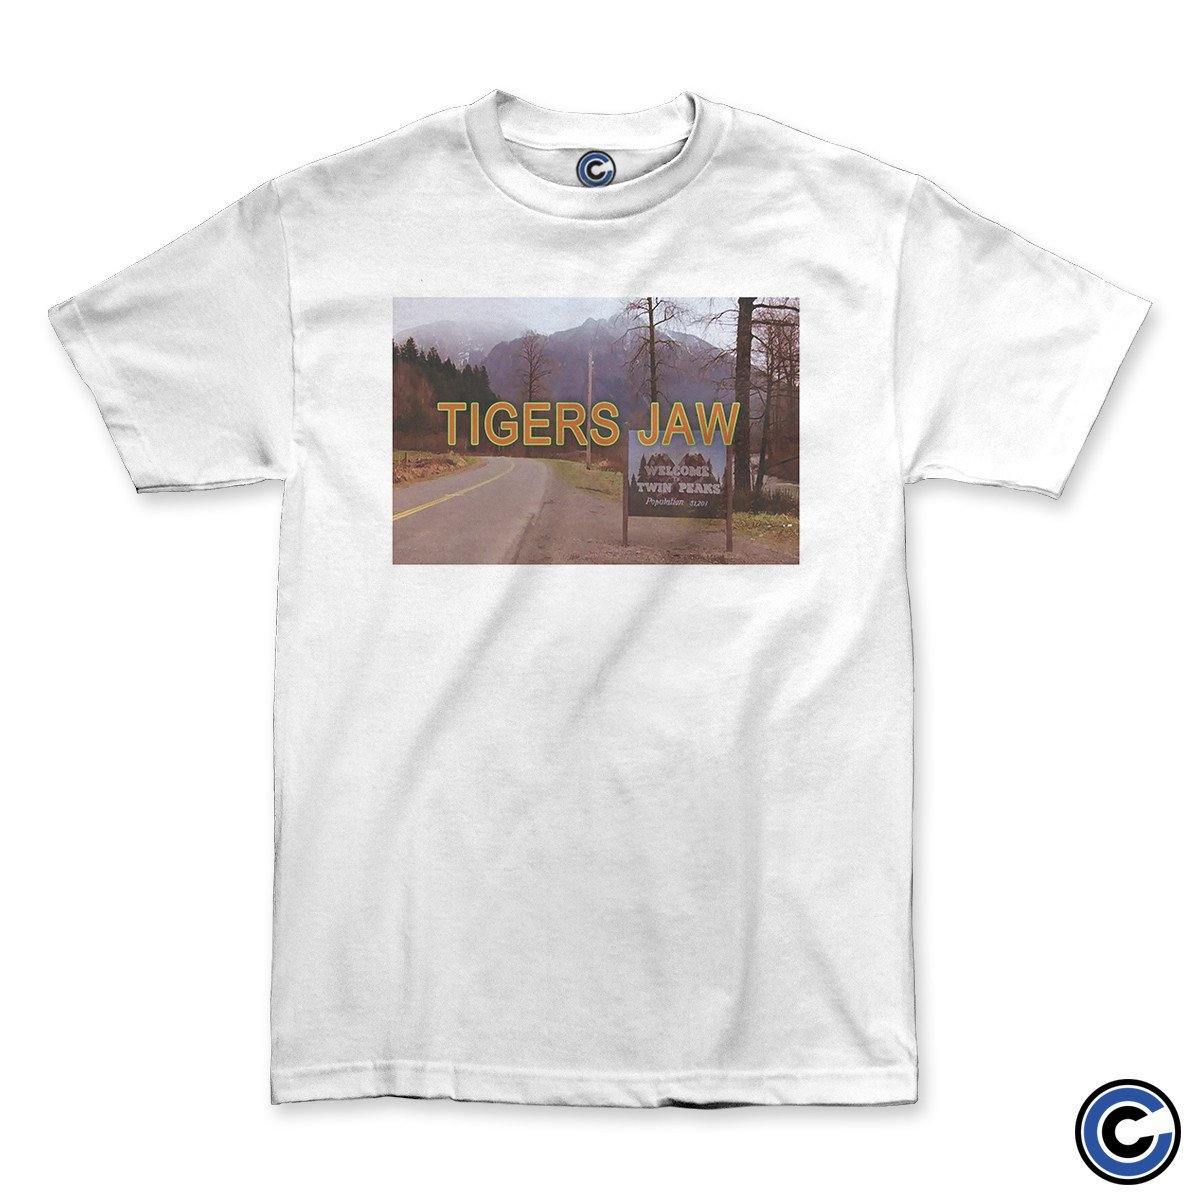 Buy – Tigers Jaw "Twin Peaks" Shirt – Band & Music Merch – Cold Cuts Merch